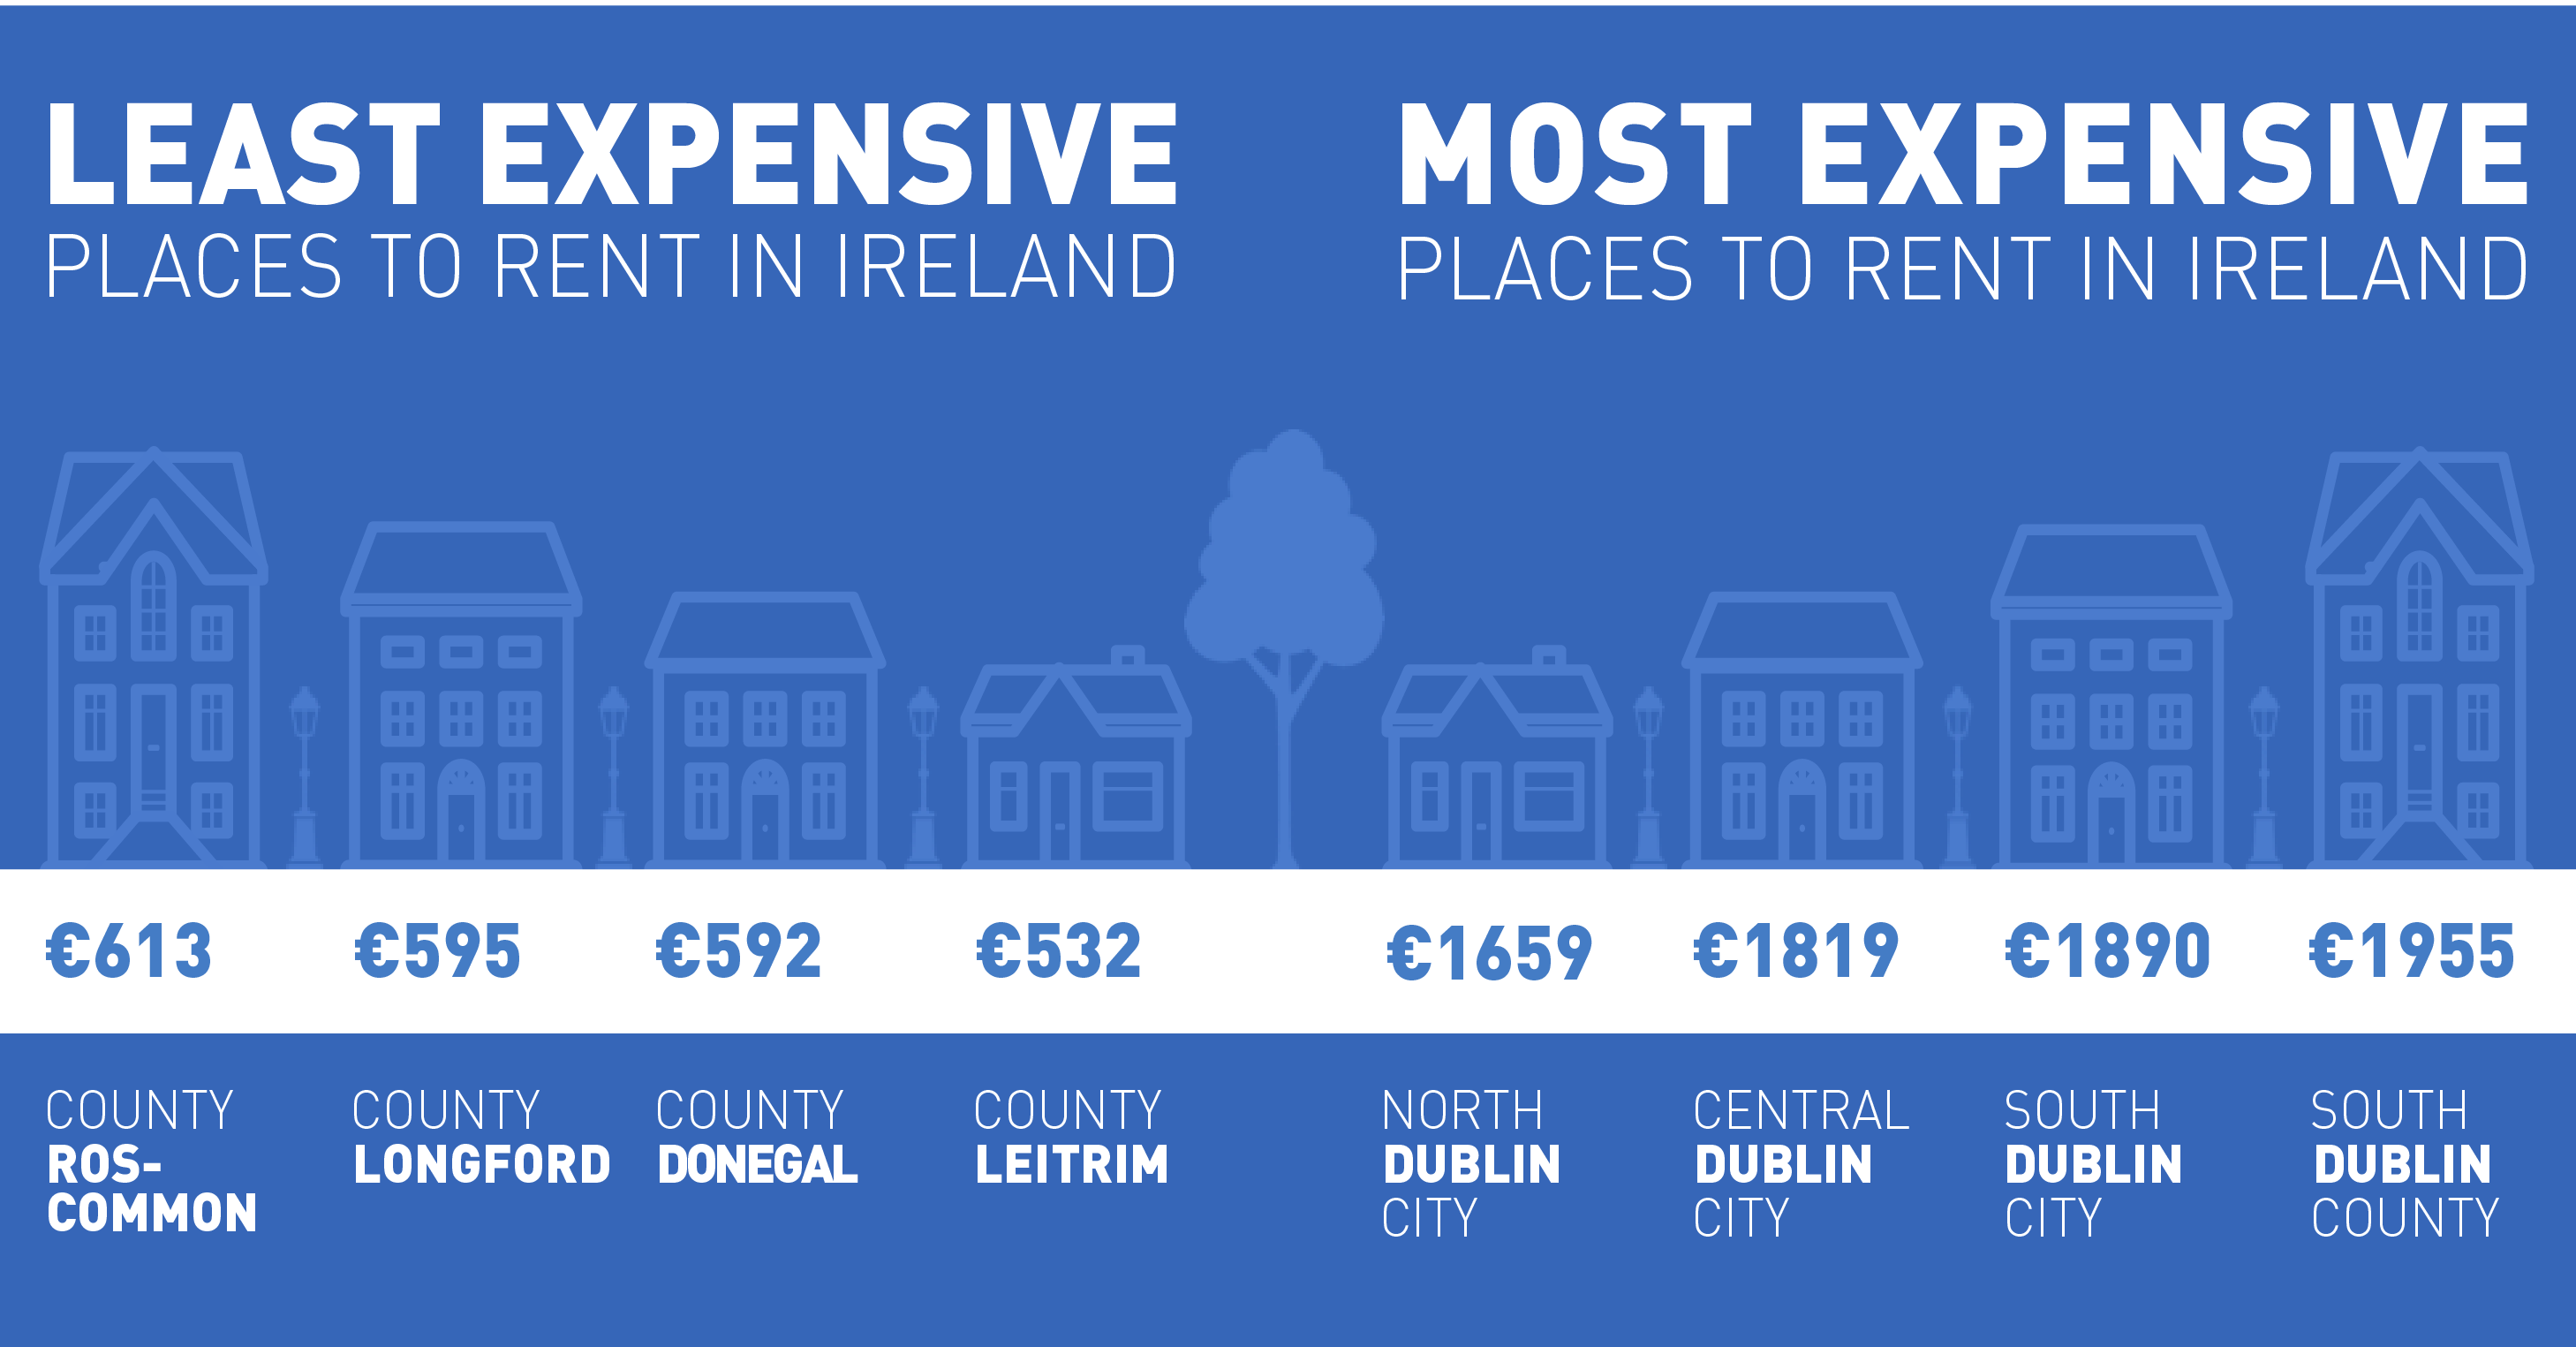 Least and most expensive places to rent in Ireland